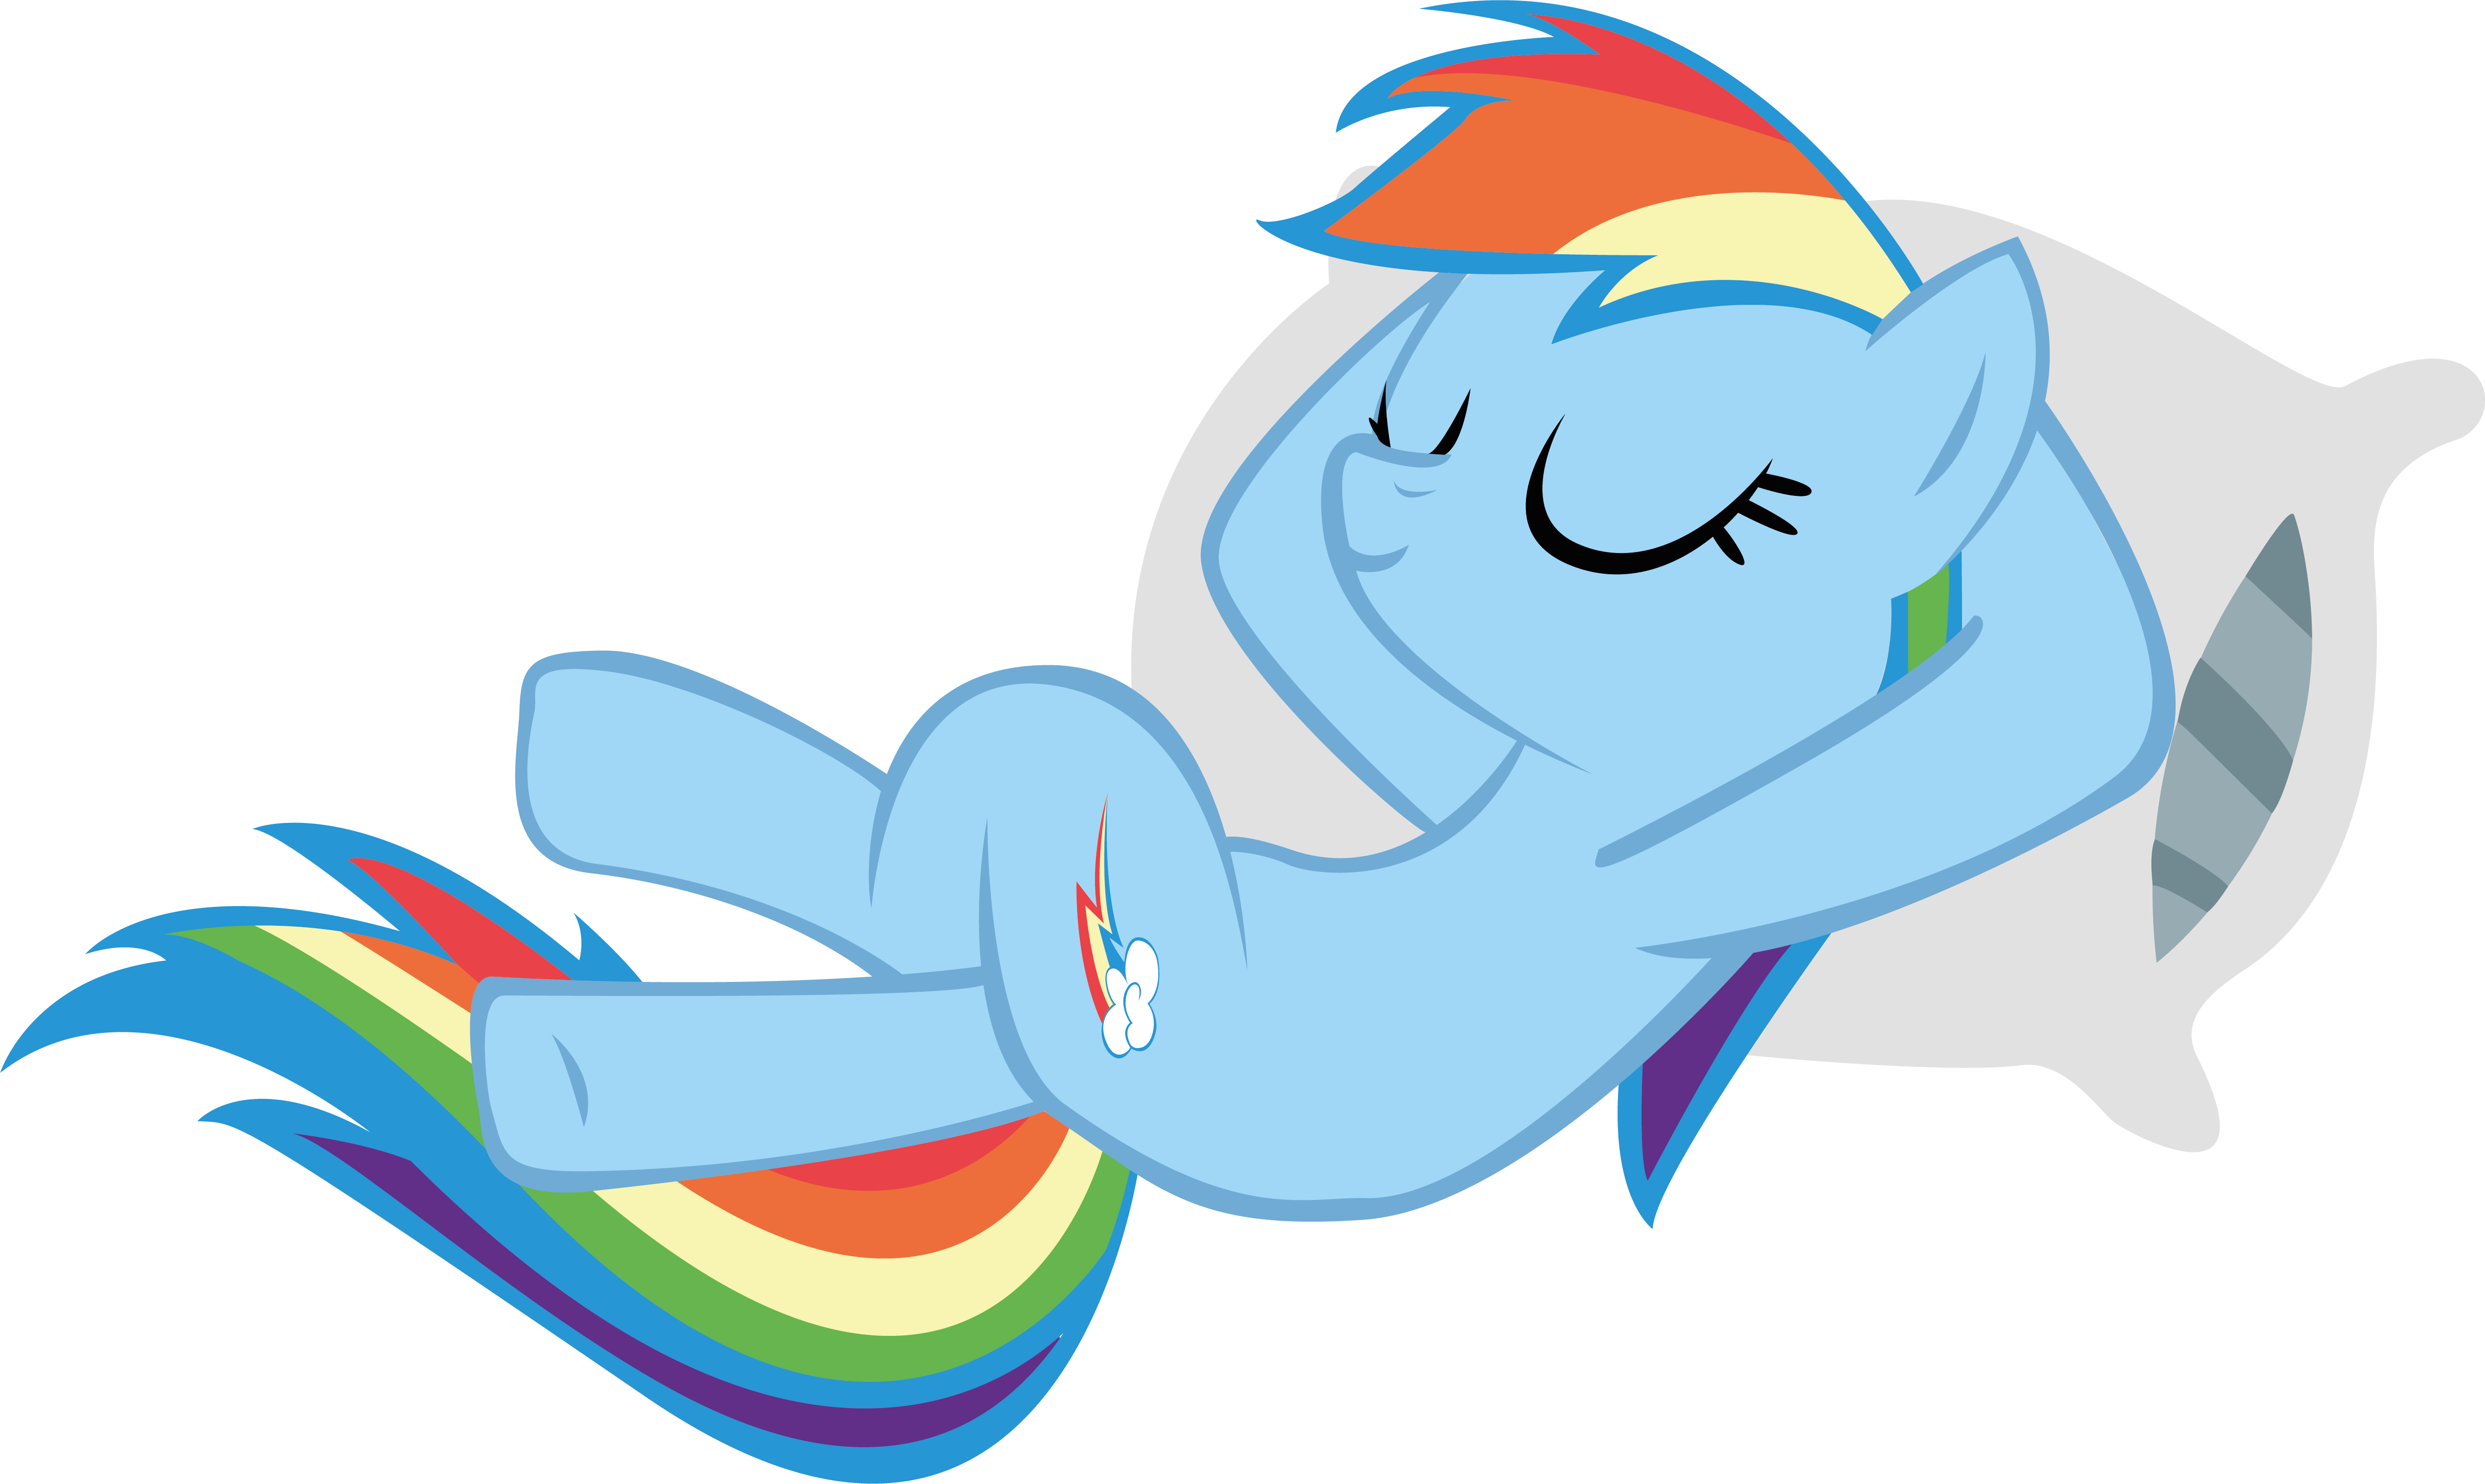 Waranto, May The Best Pet Win, Pillow, Rainbow Dash, - Portable Network Graphics (5265x3145)